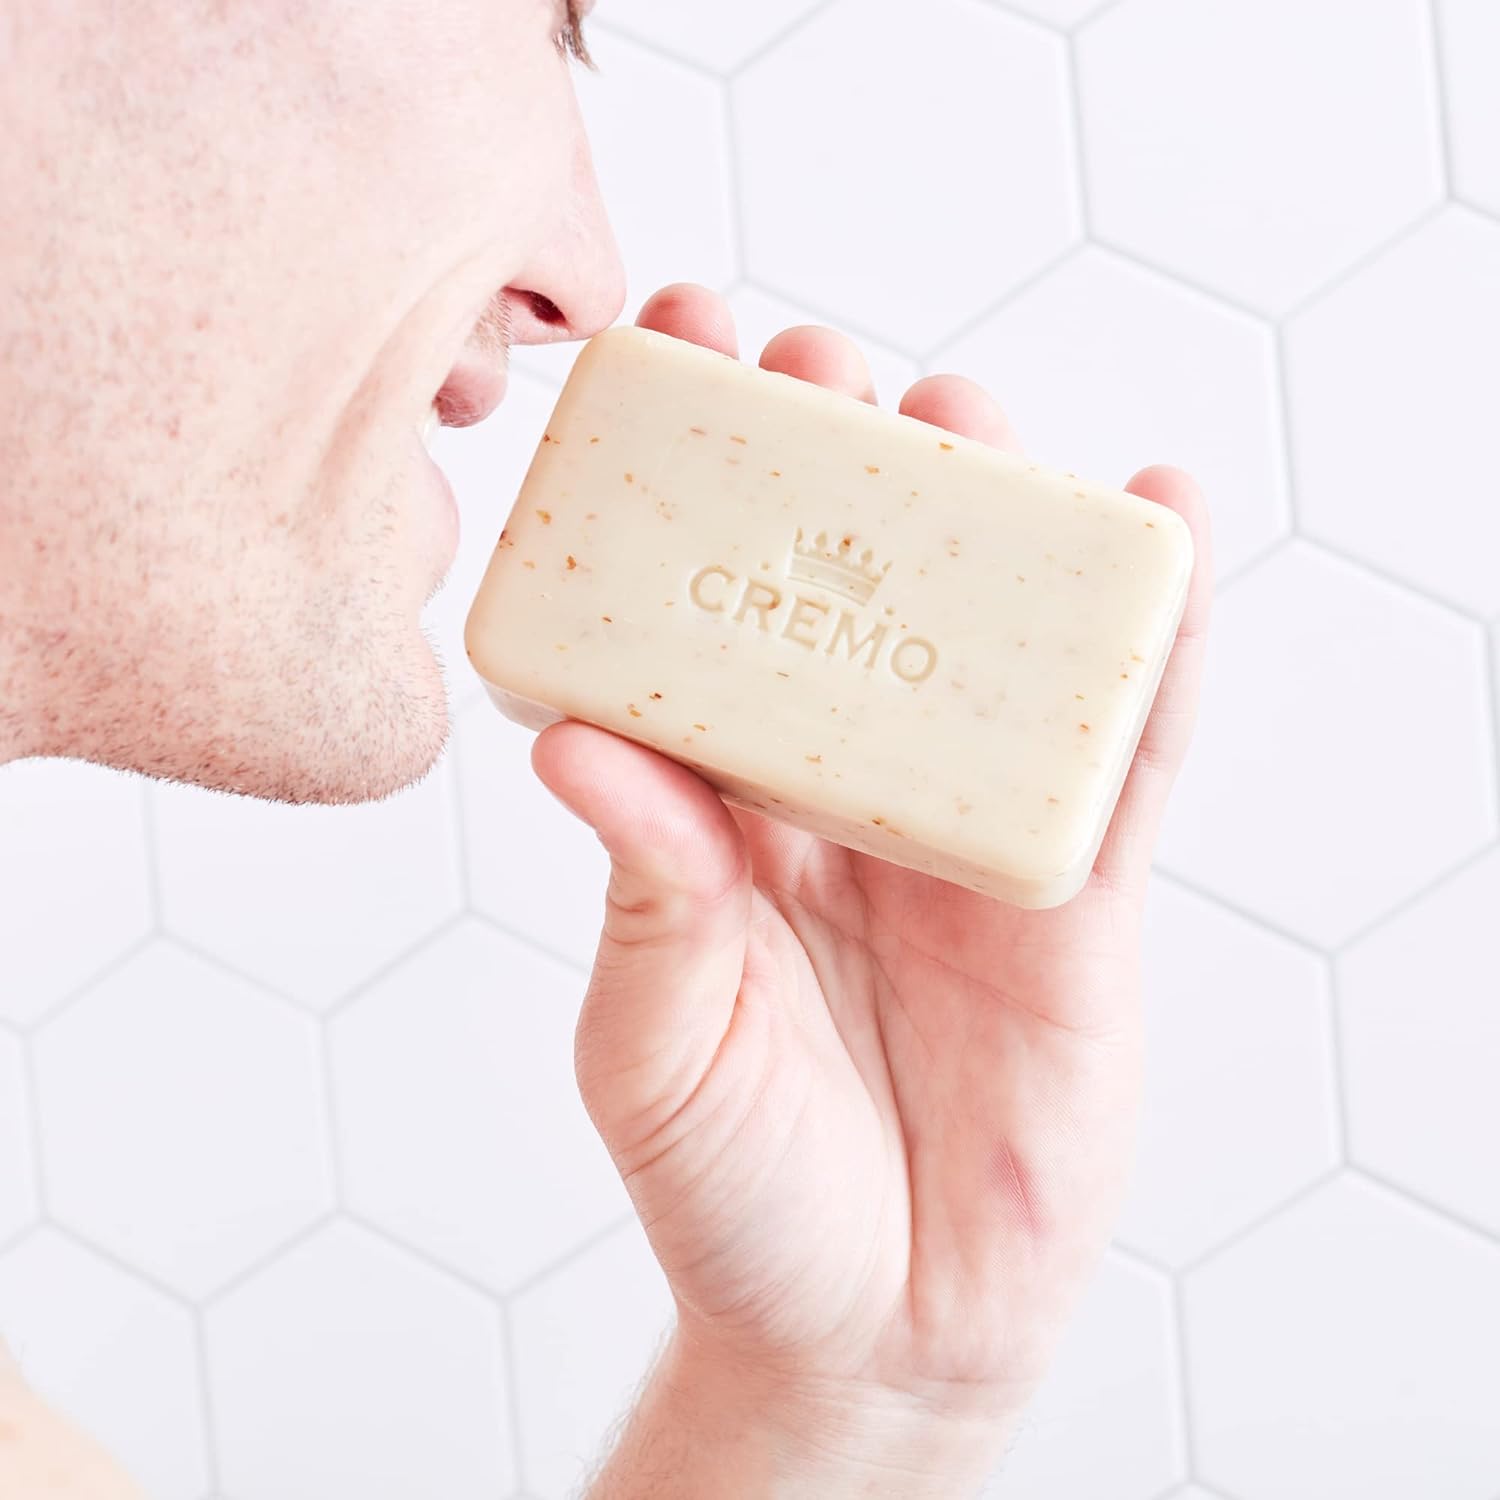 Cremo Exfoliating Body Bars Distiller's Blend - A Combination of Lava Rock and Oat Kernel Gently Polishes While Shea Butter Leaves Your Skin Feeling Smooth & Healthy : Everything Else